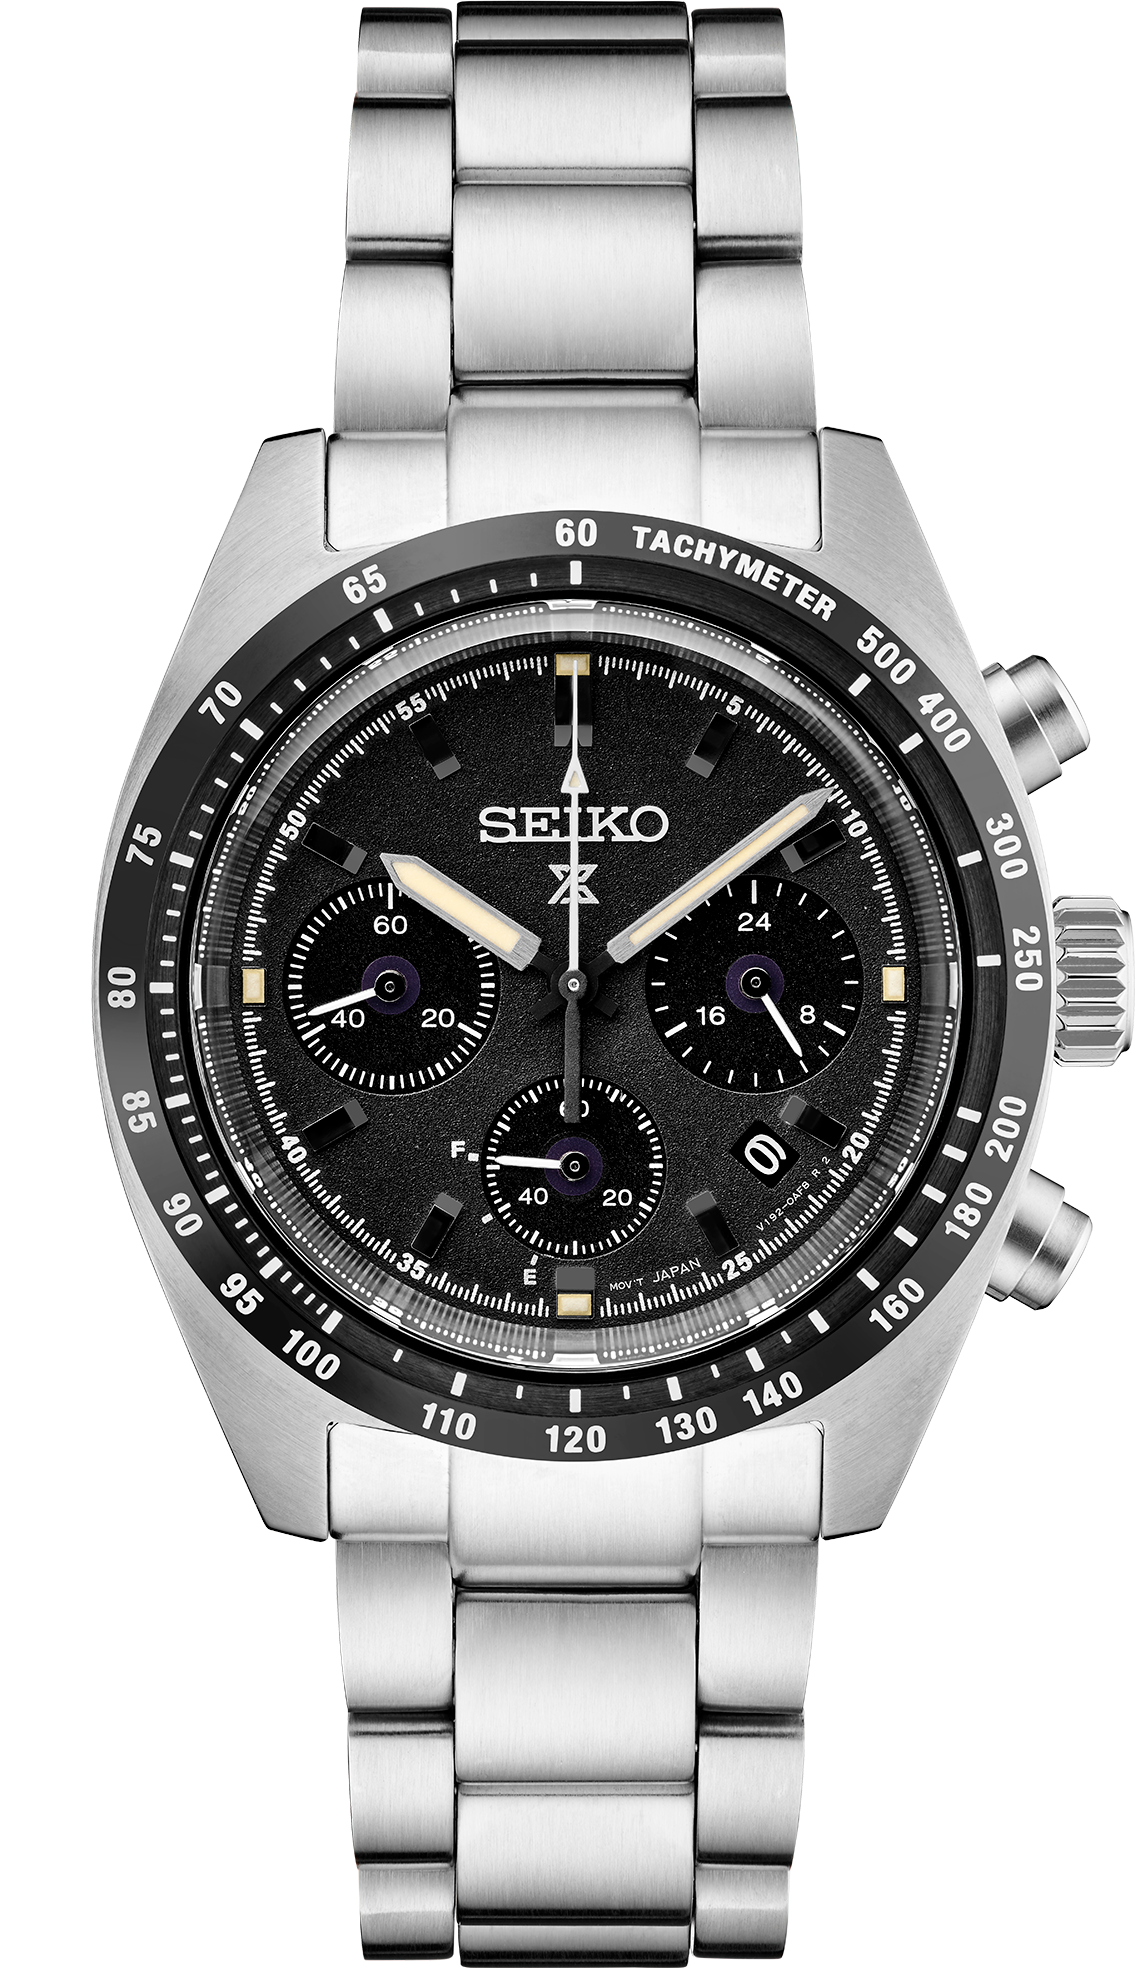 Seiko Men's Prospex Speedtimer Chronograph Watch with Black Dial - SSC –  Security Jewelers Duluth, MN